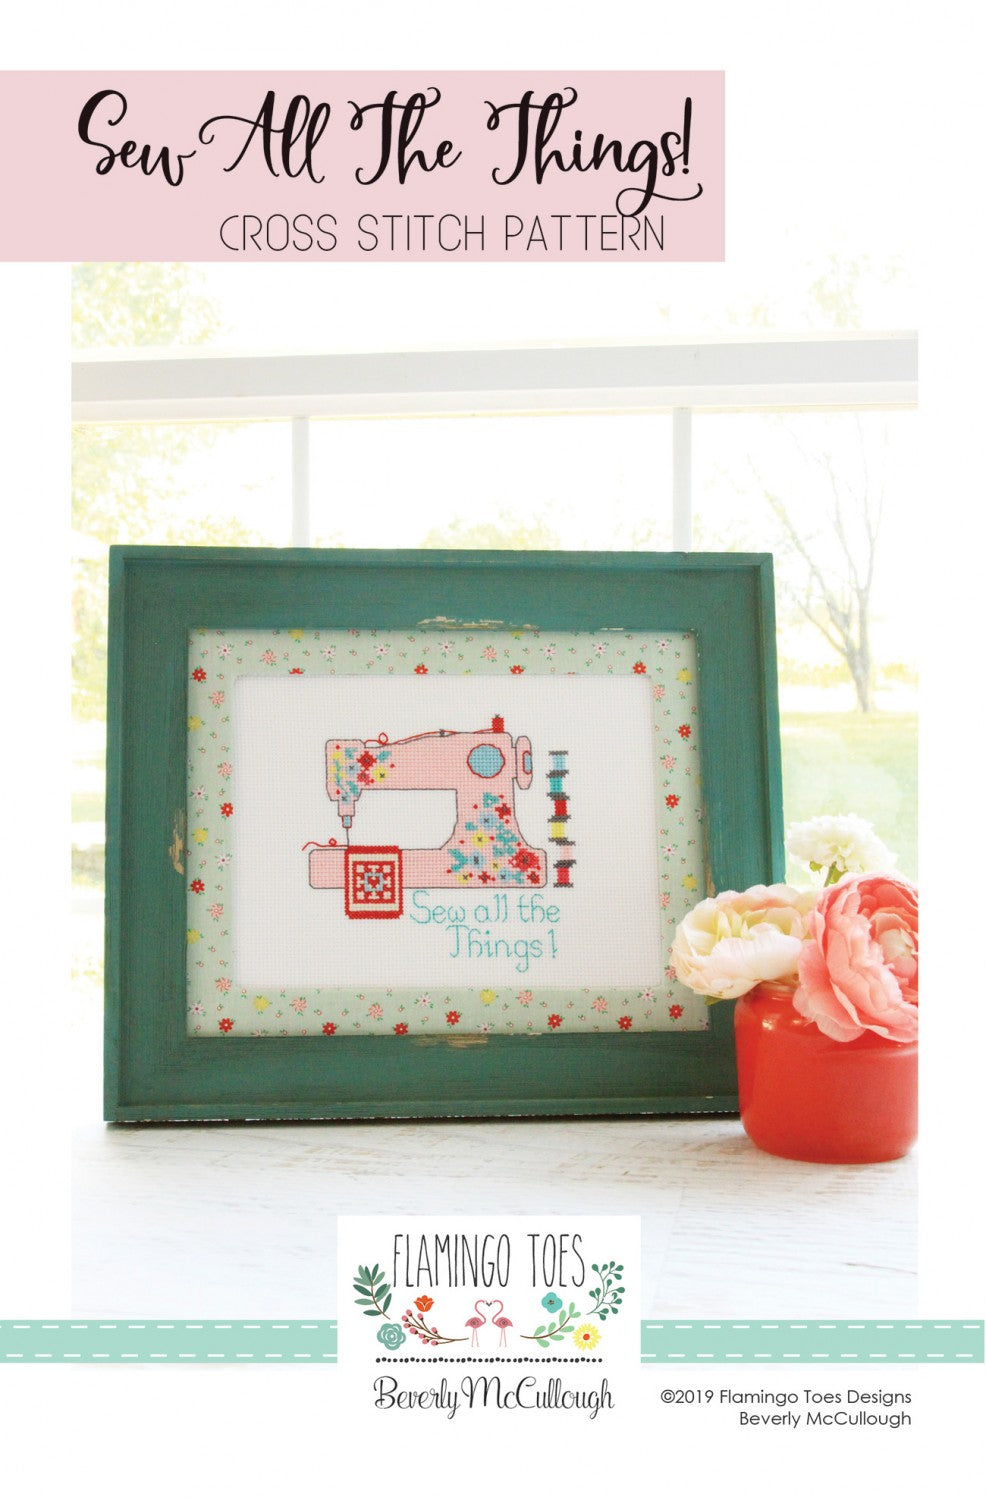 Sew All the Things by Flamingo Toes - PAPER Pattern